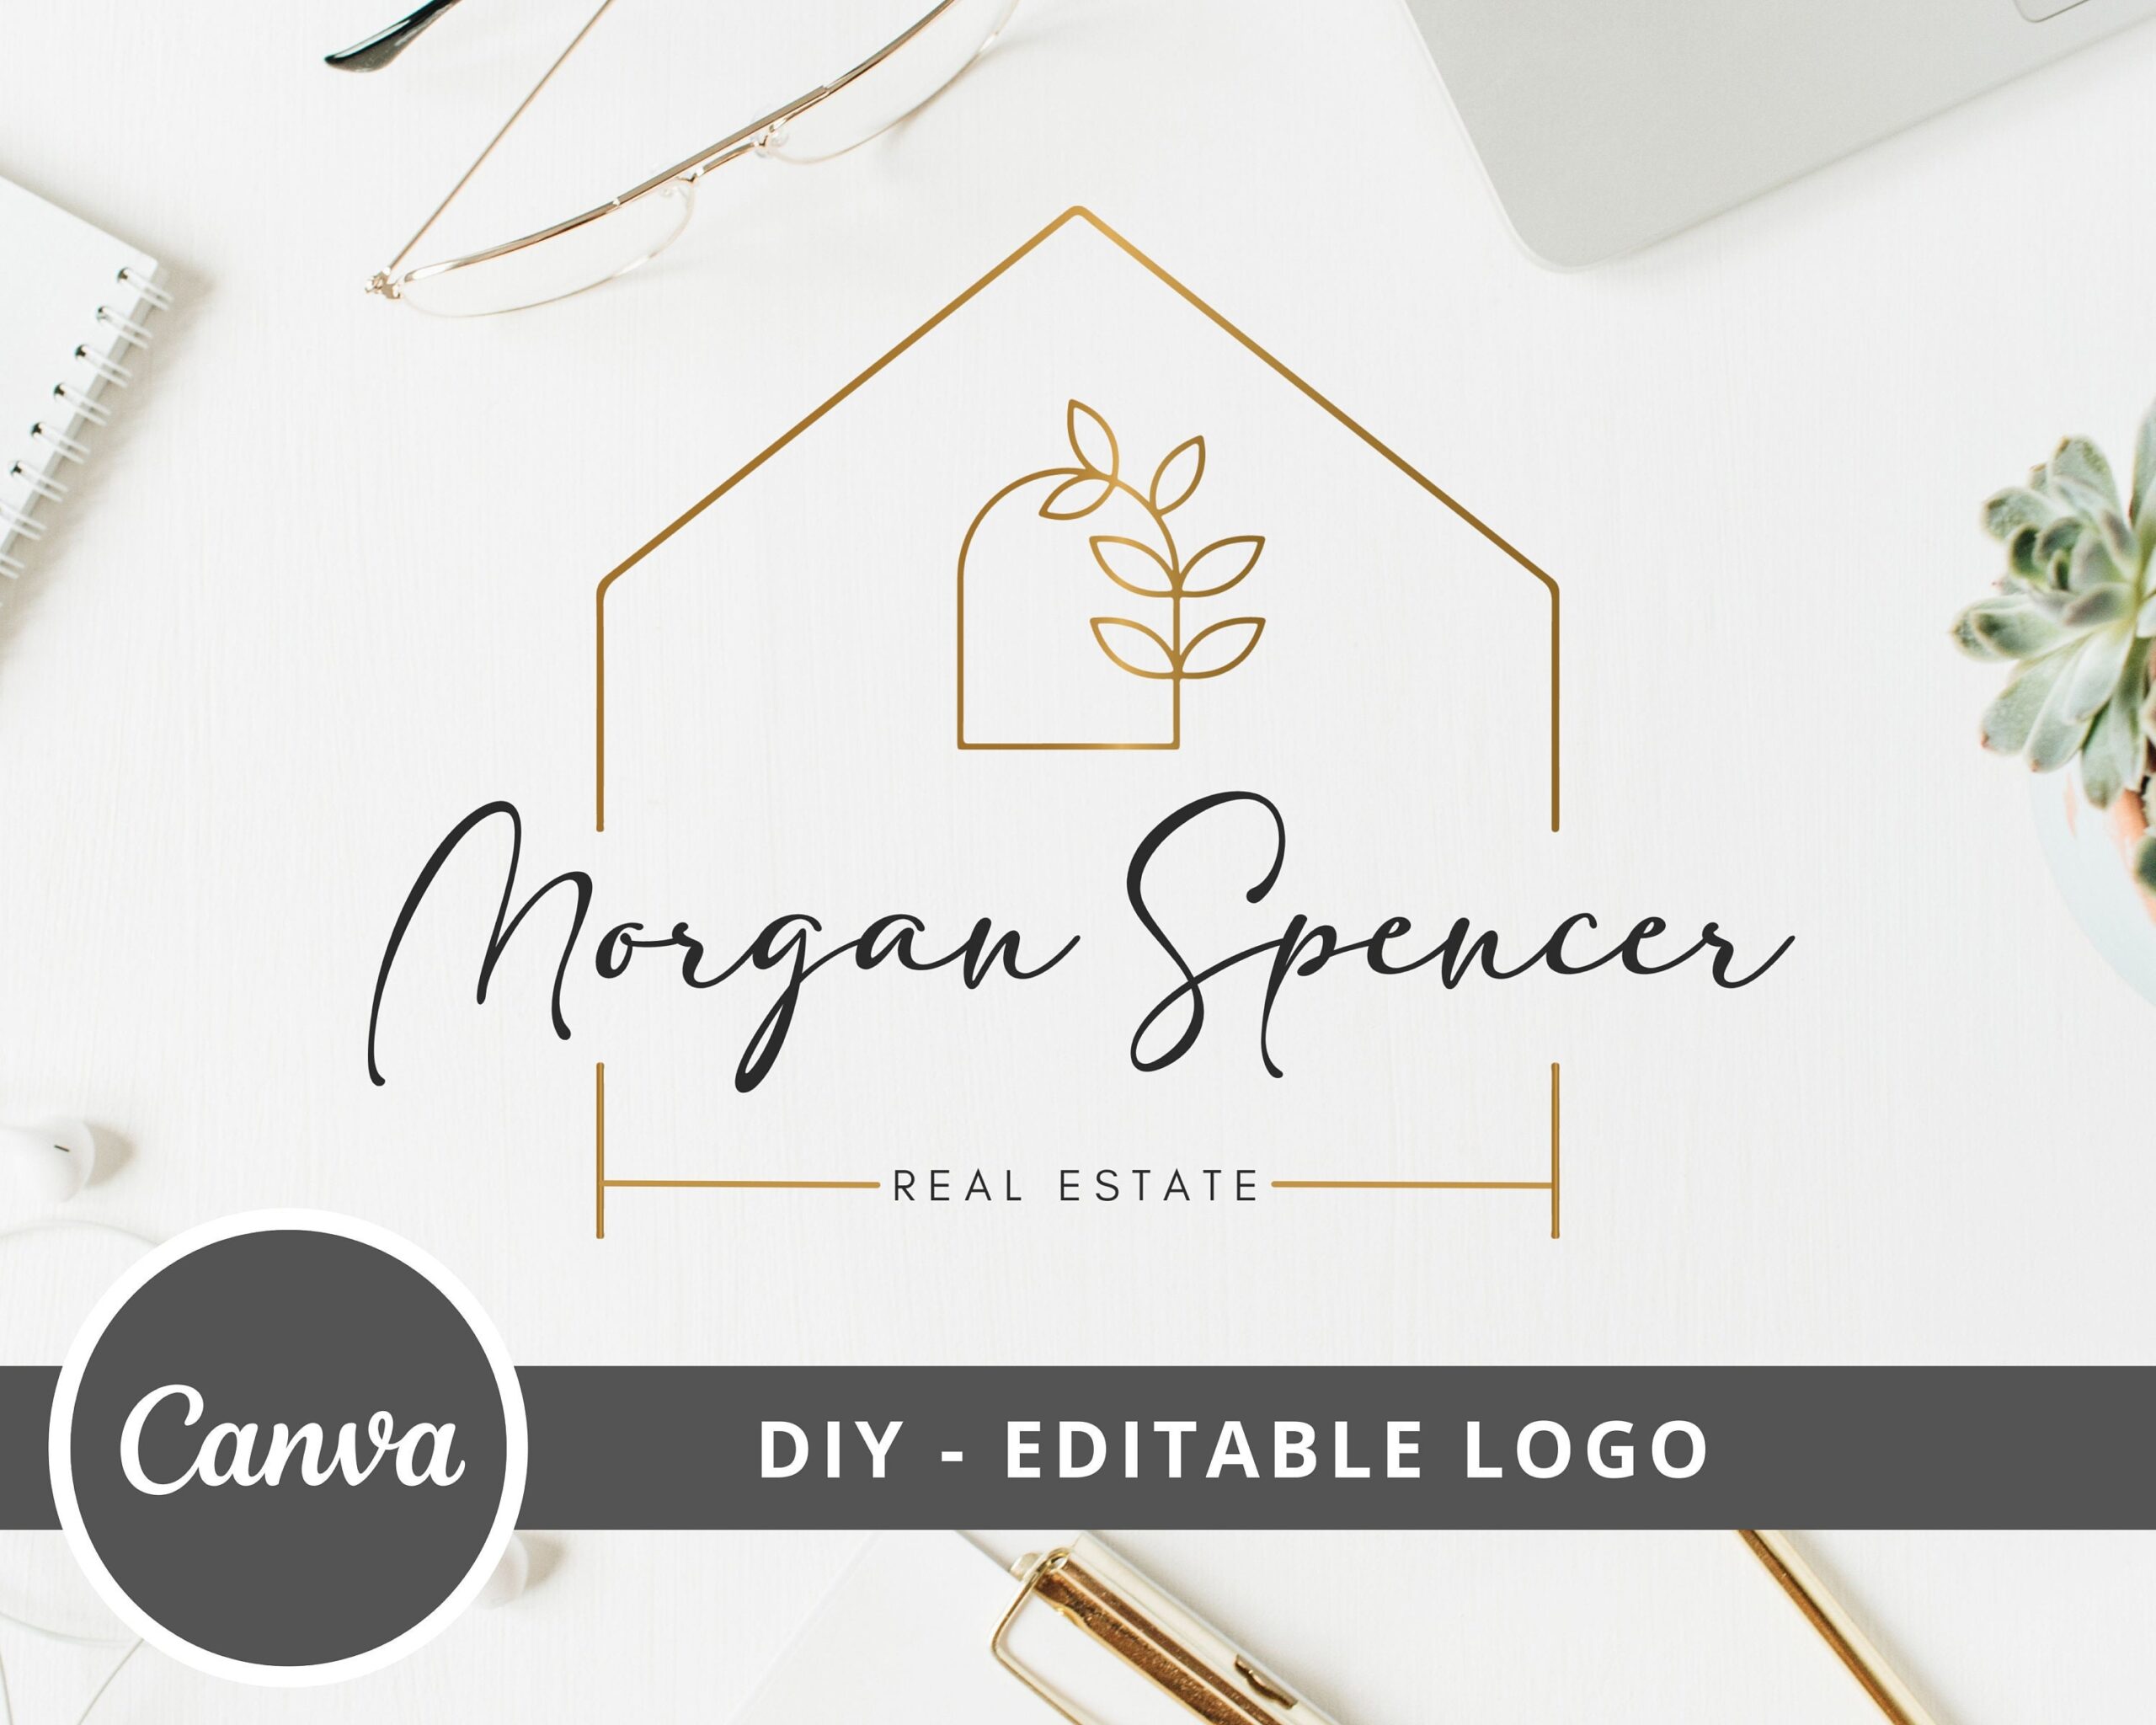 DIY Real Estate Logo Template, Logo Design Canva Template for Real Estate - Gold and Black, House Window Leaves, All Included Instant Access